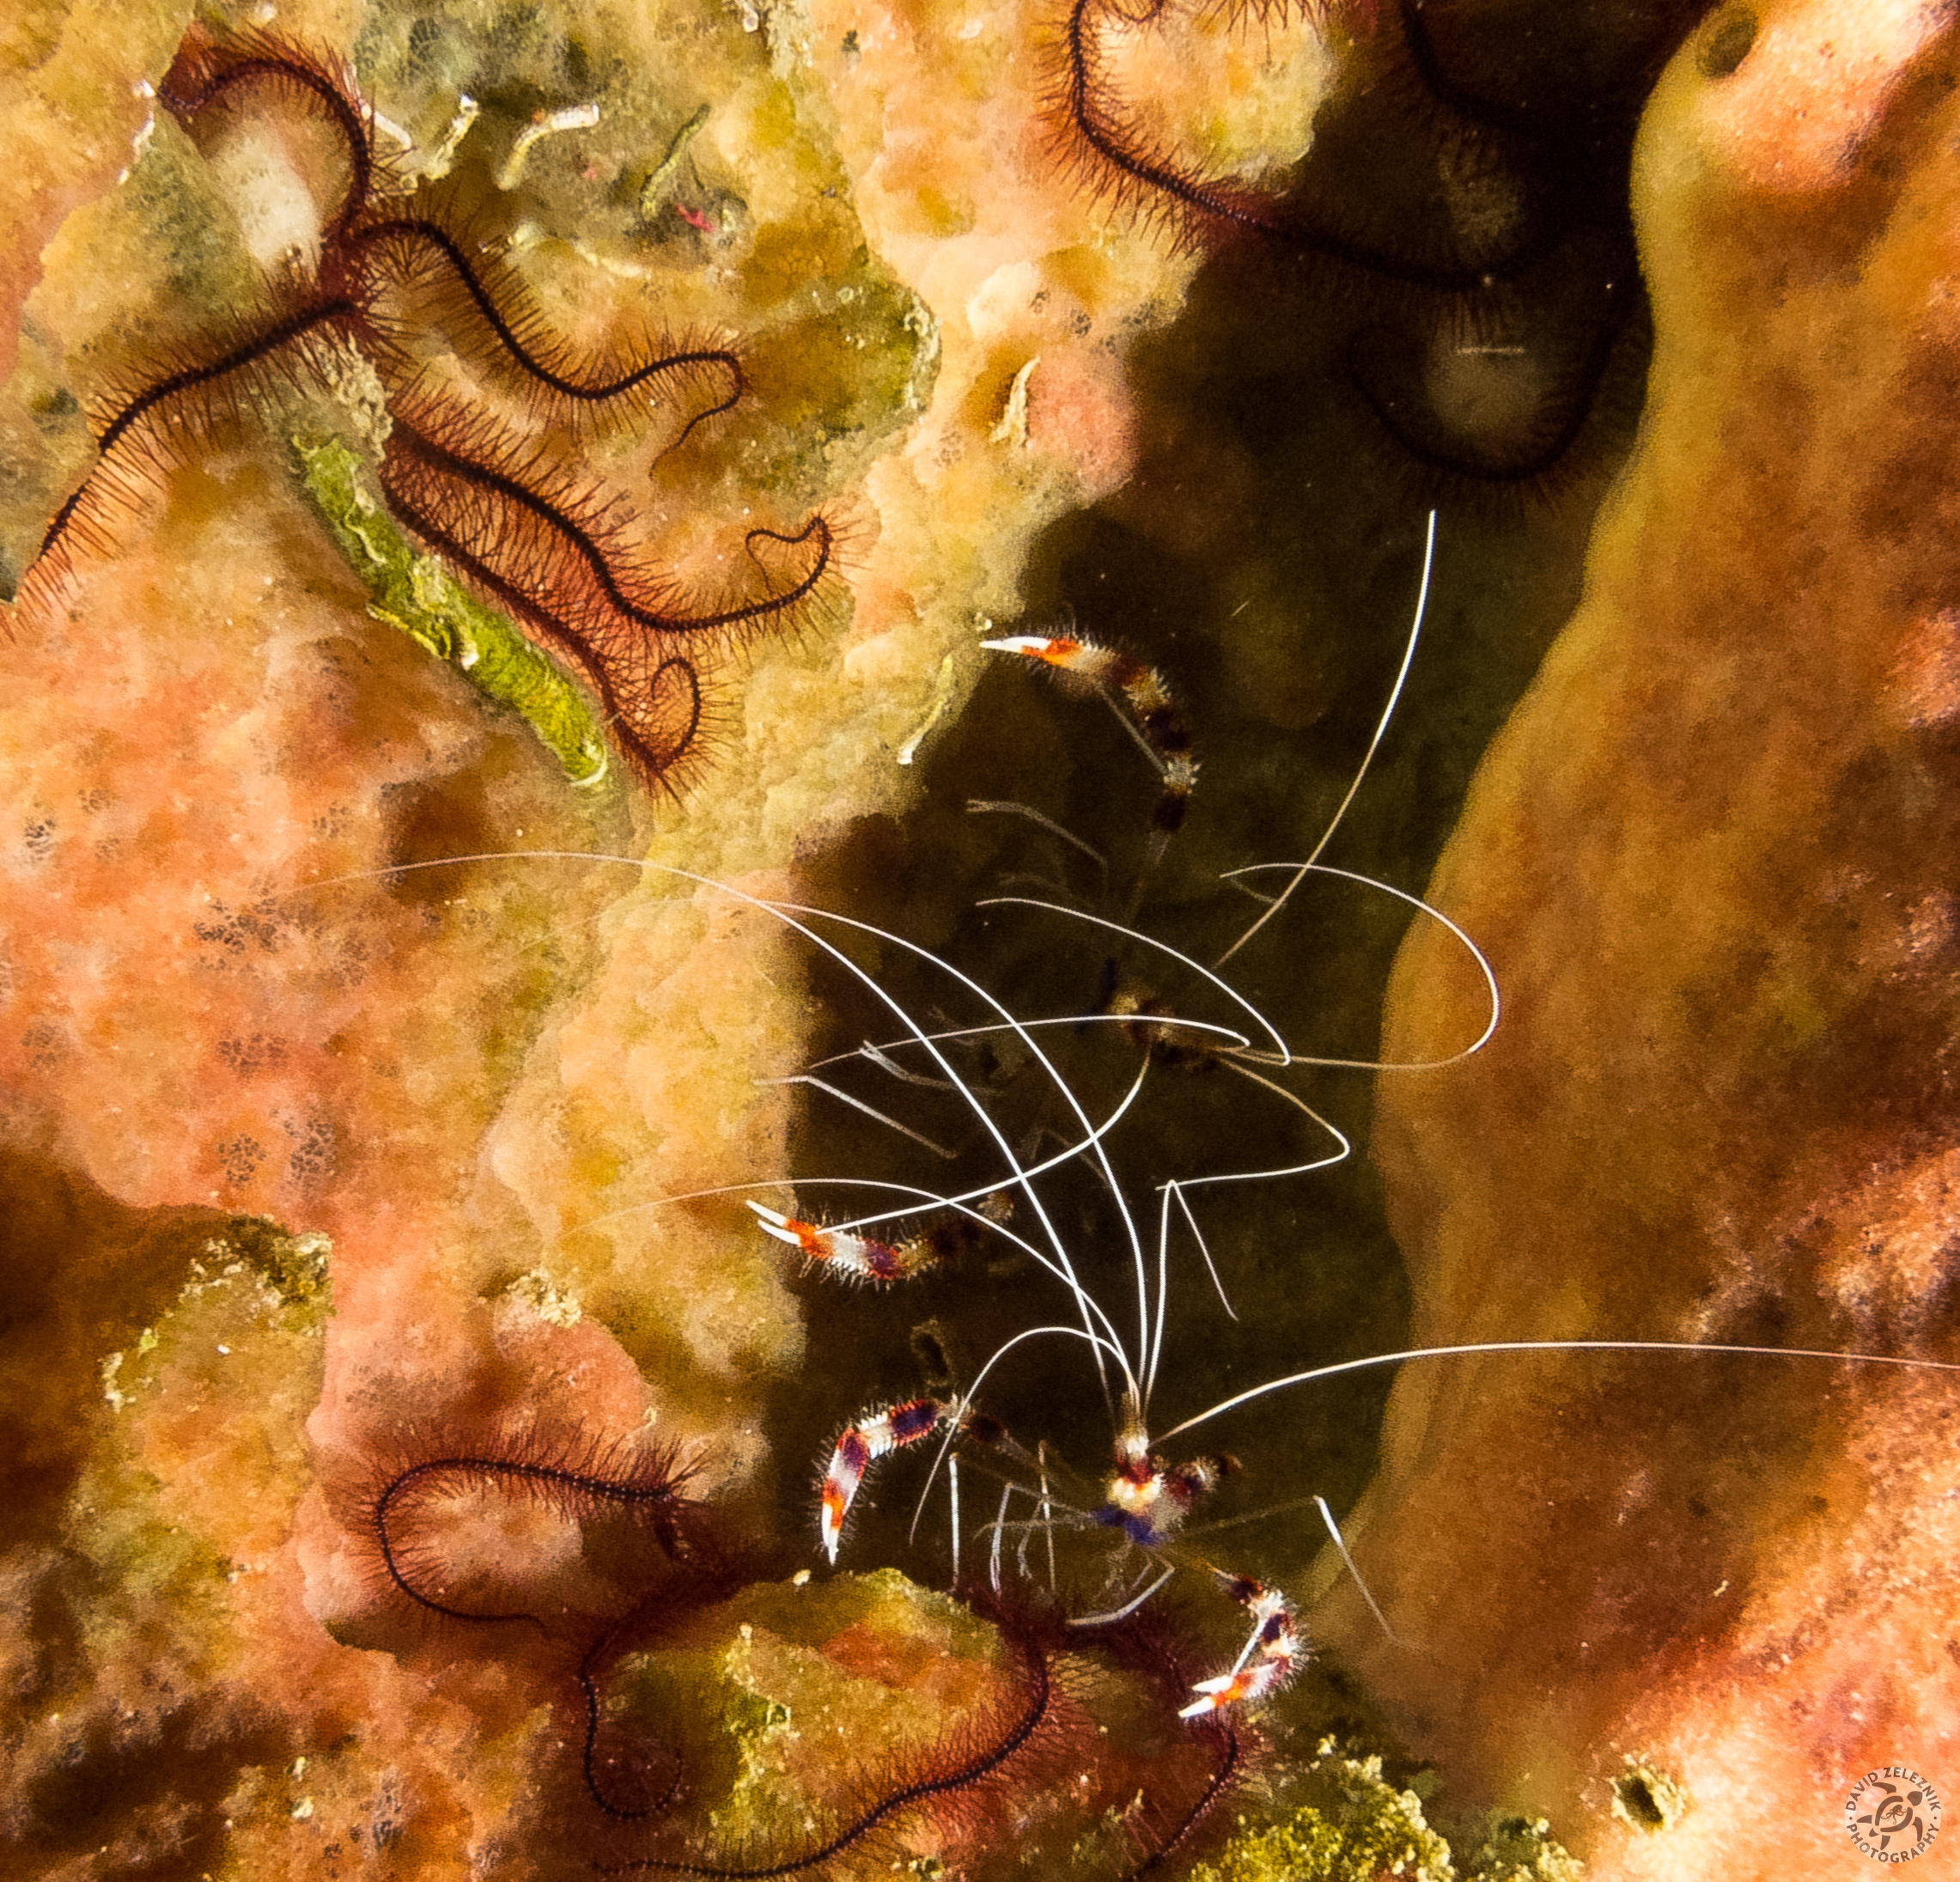 Banded Coral Shrimp and Brittle Stars nestled in a sponge<br/><small>Little Tunnels dive site, Grand Cayman</small>